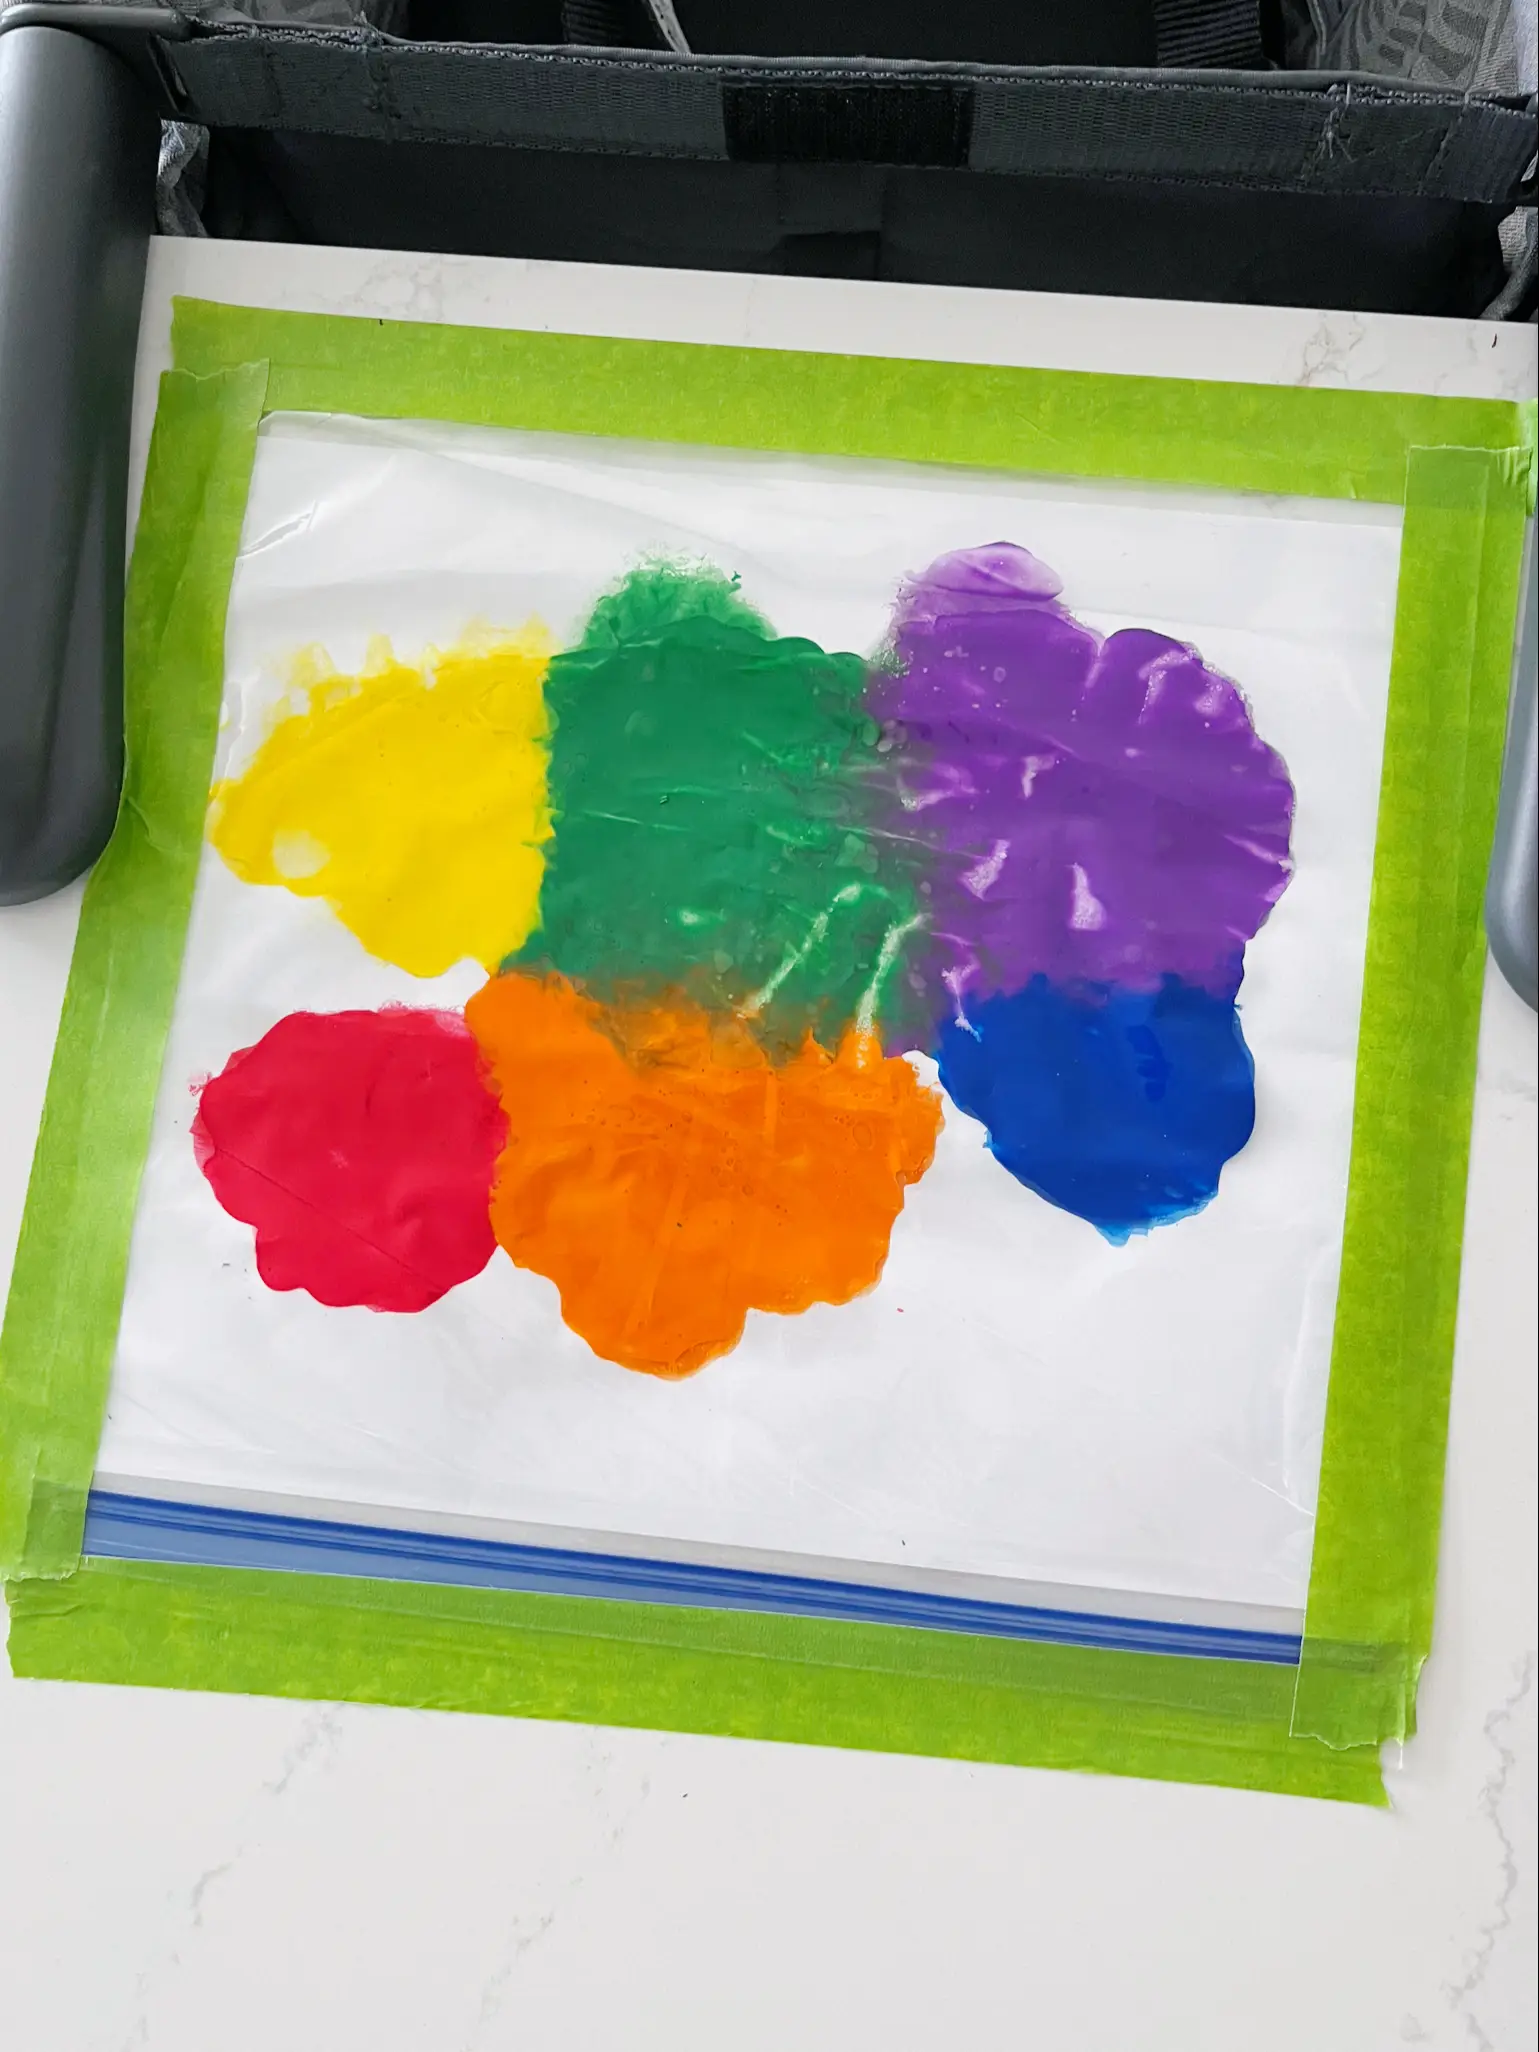 mess-free painting for toddlers - Lemon8 Search